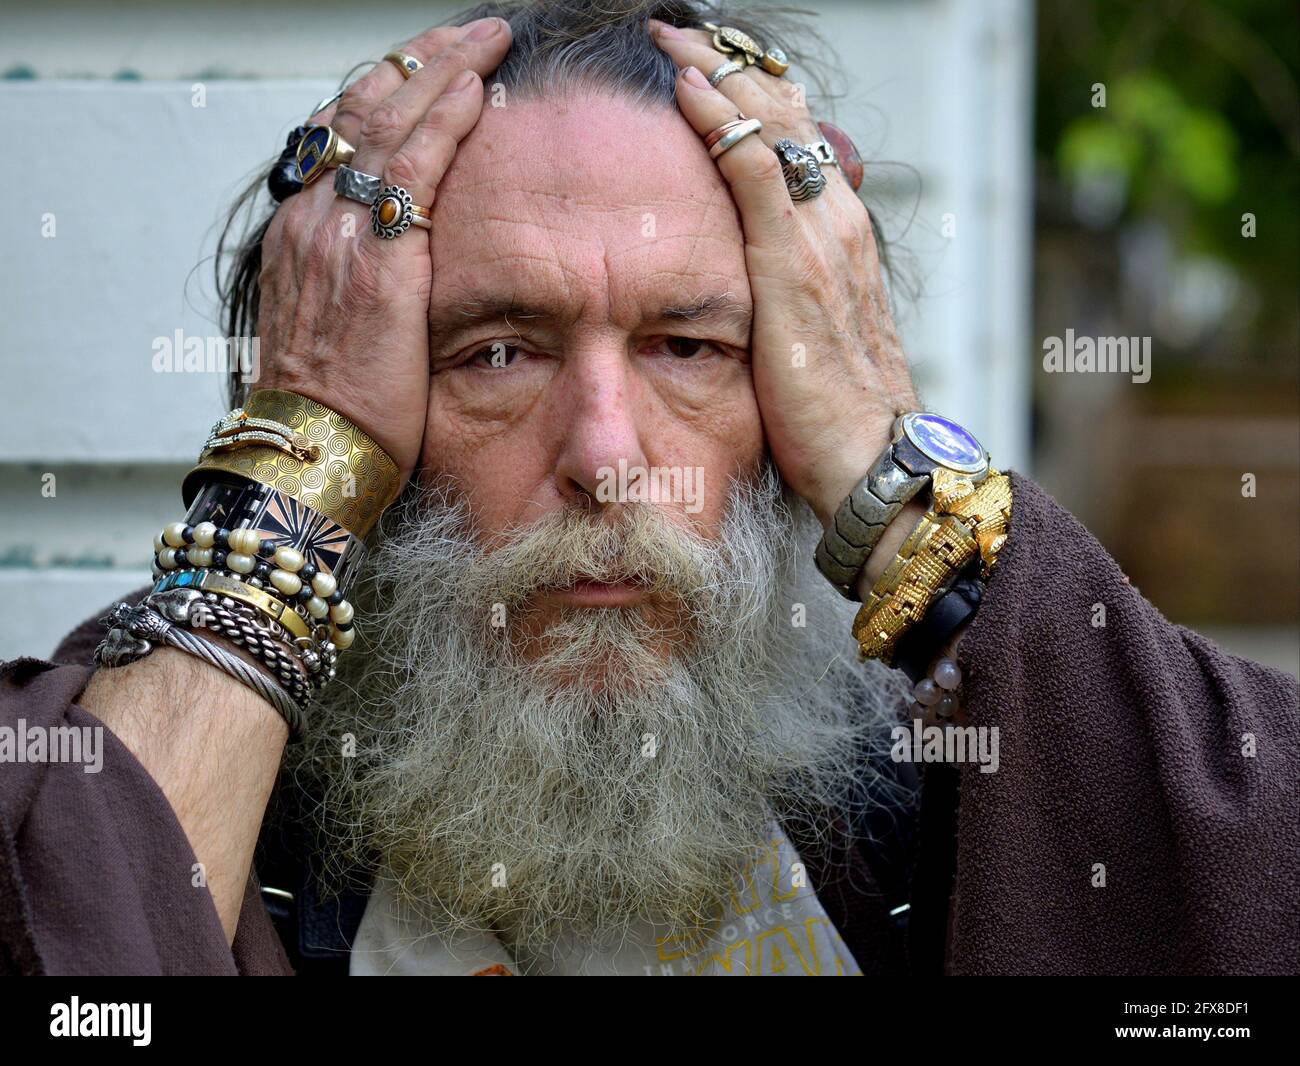 Old esoteric Caucasian wise man with thick grey beard poses for the camera, holds his head in his hands, and shows his assorted rings and bracelets. Stock Photo